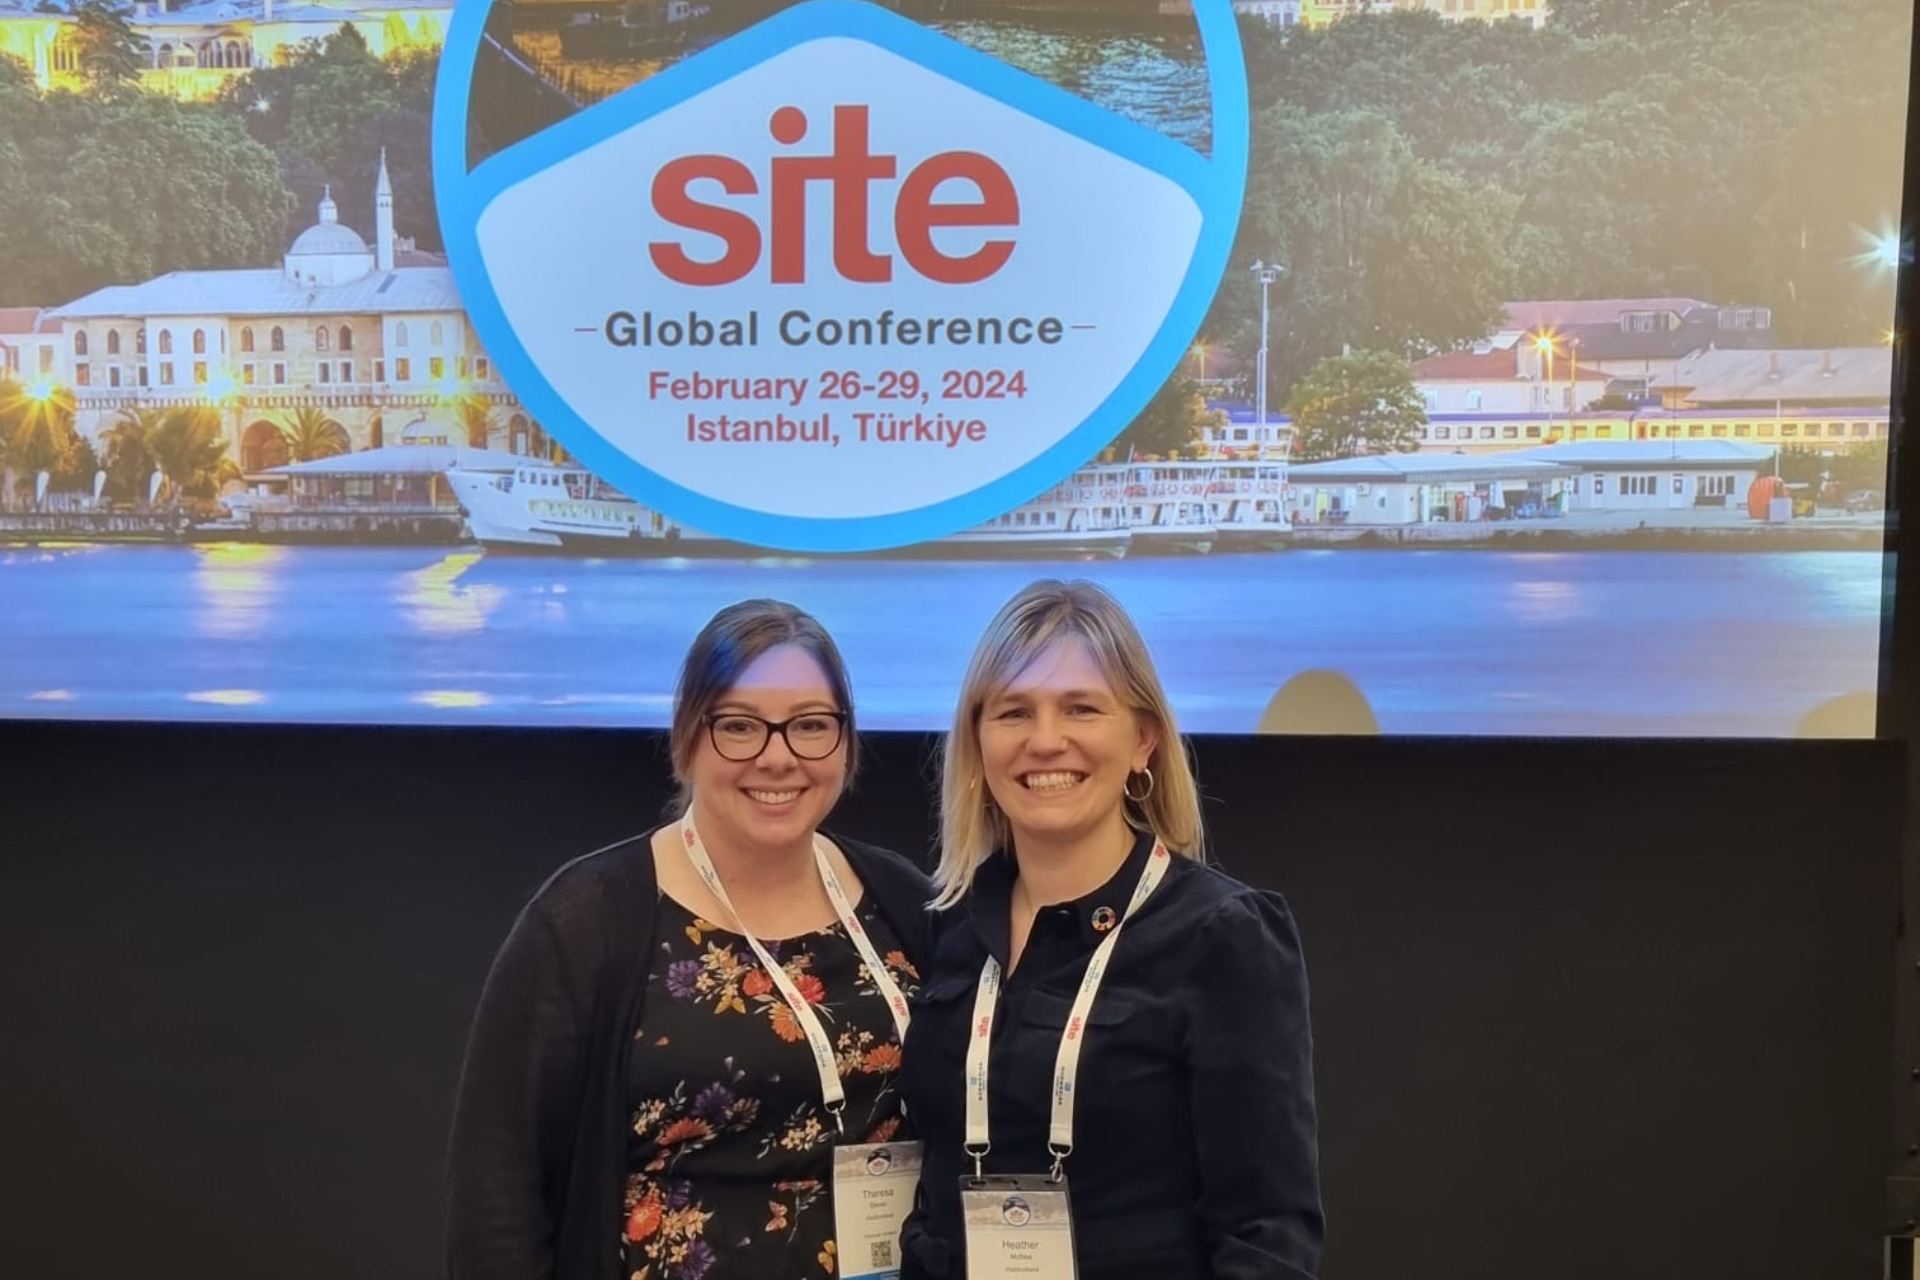 SITE Global Conference, Istanbul